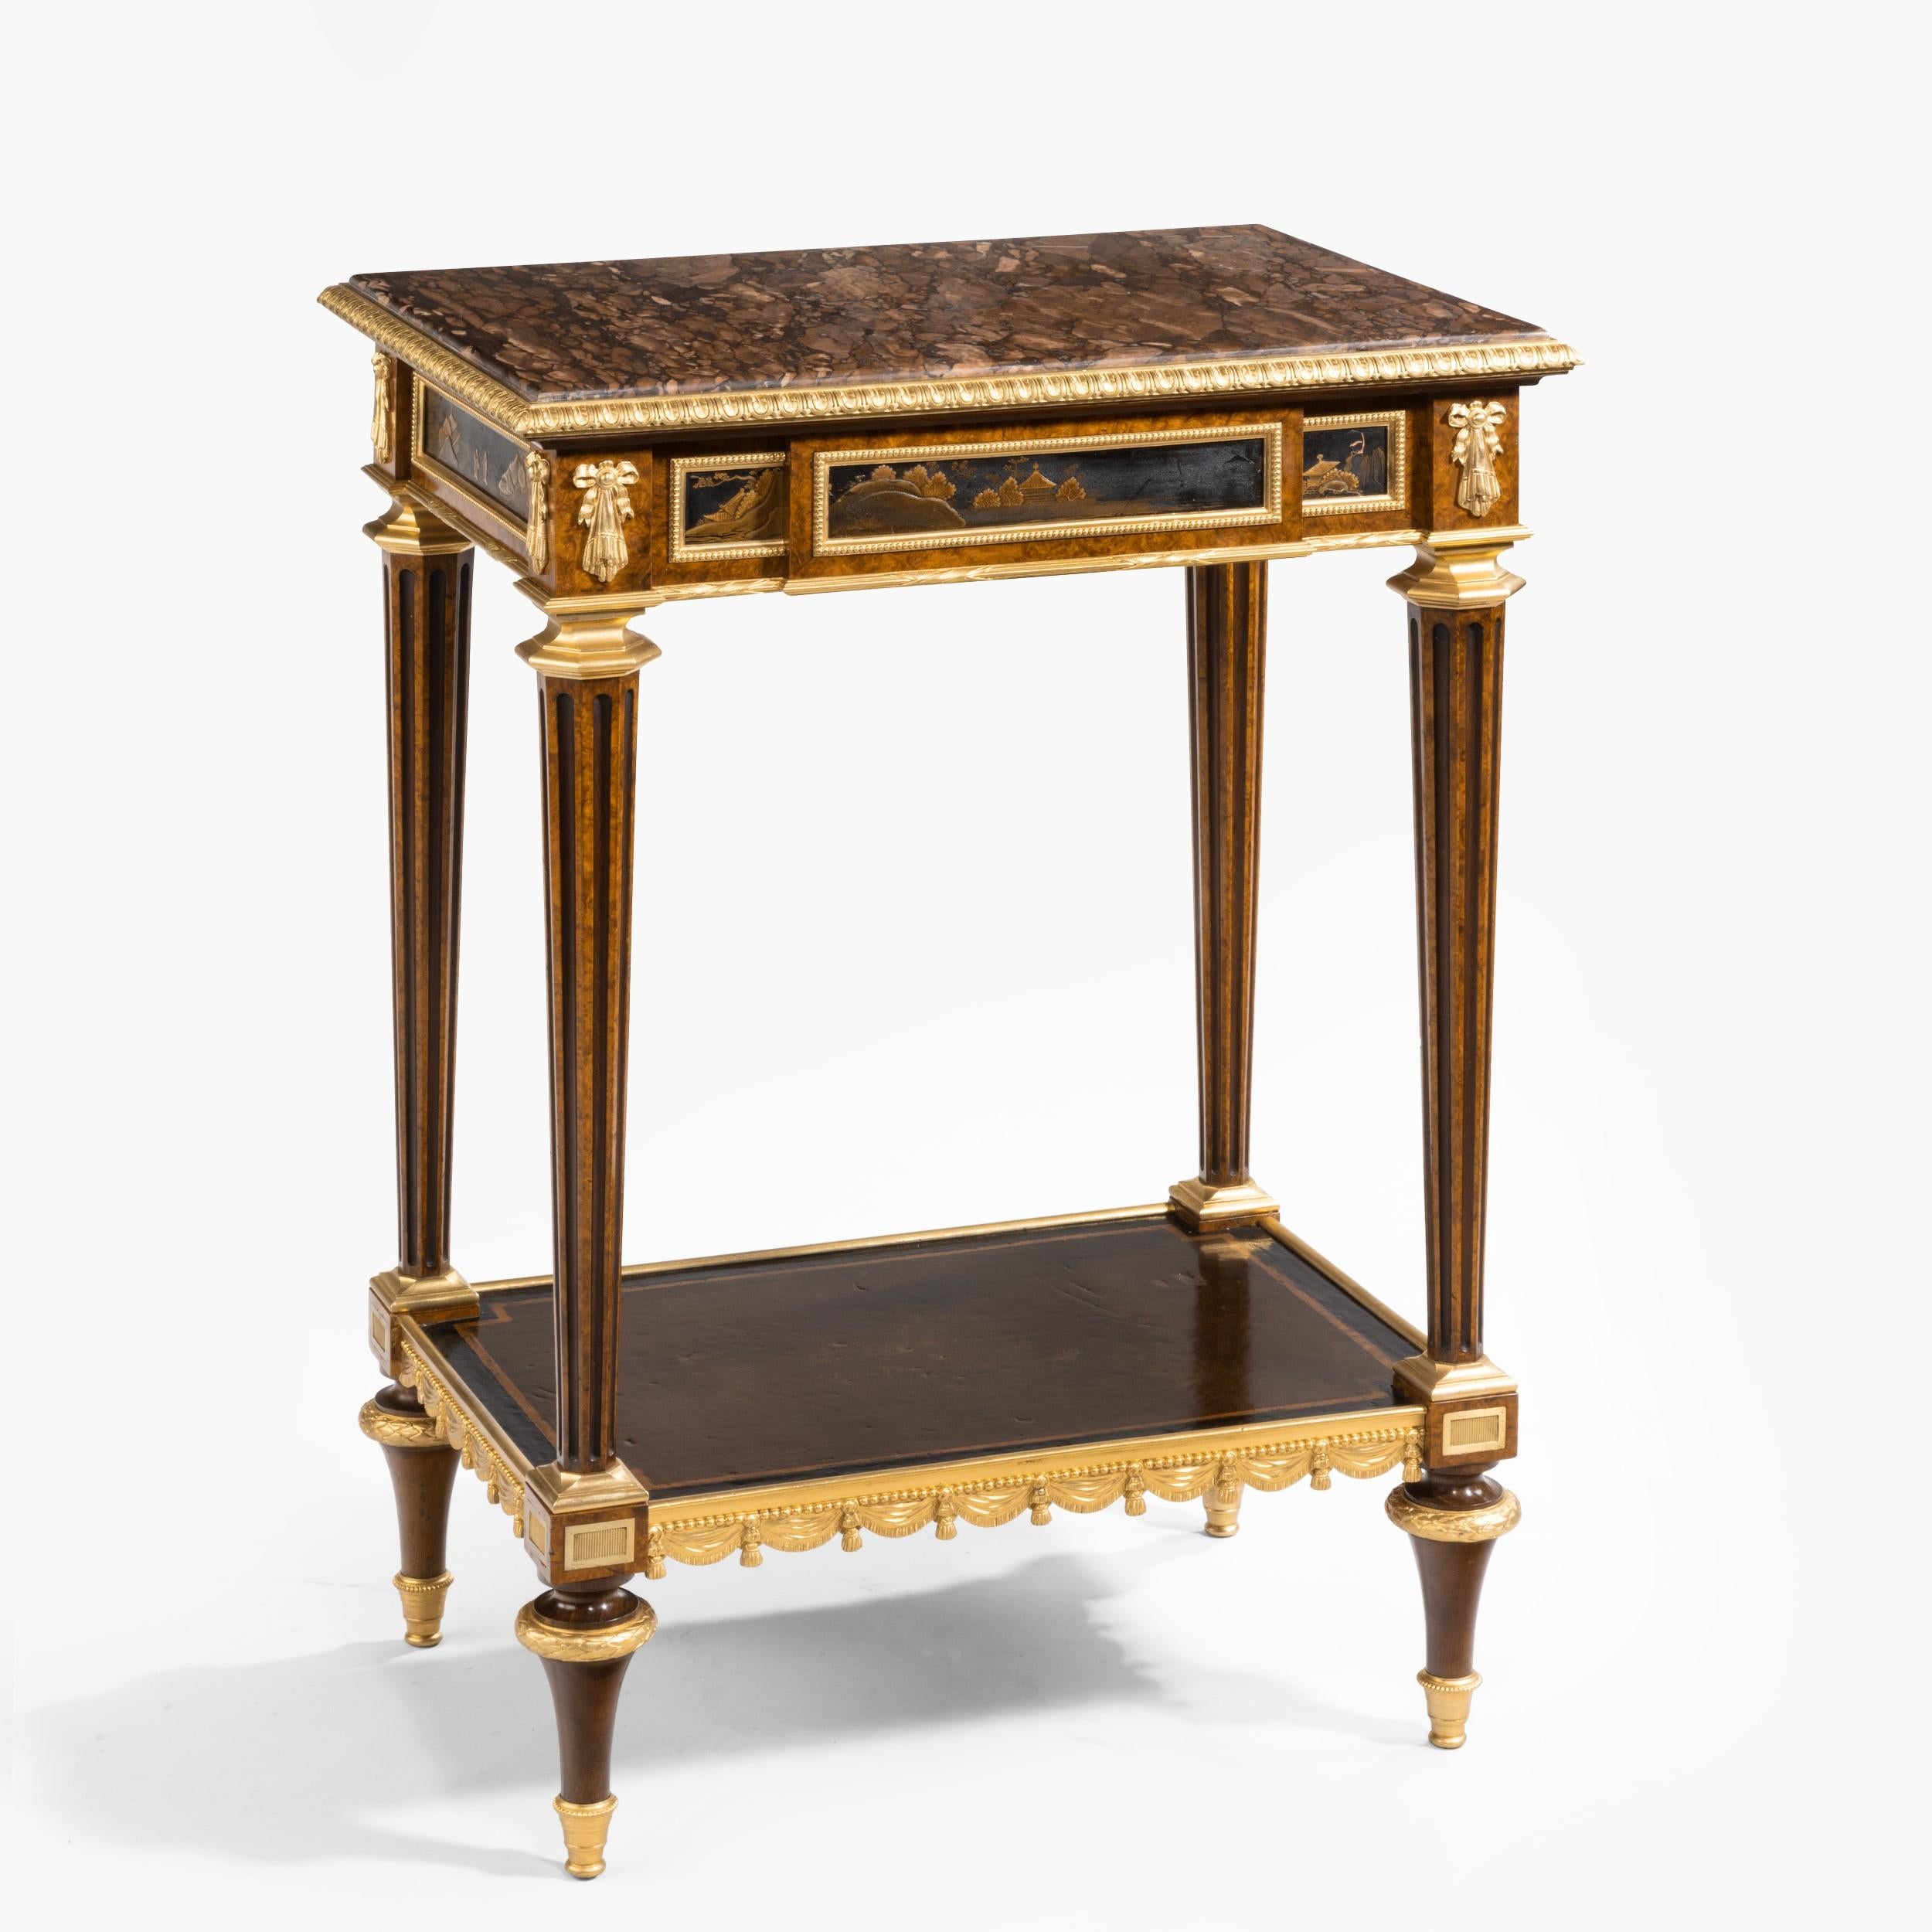 French Antique Ormolu-Mounted Side Table in the Louis XVI Manner by Henry Dasson